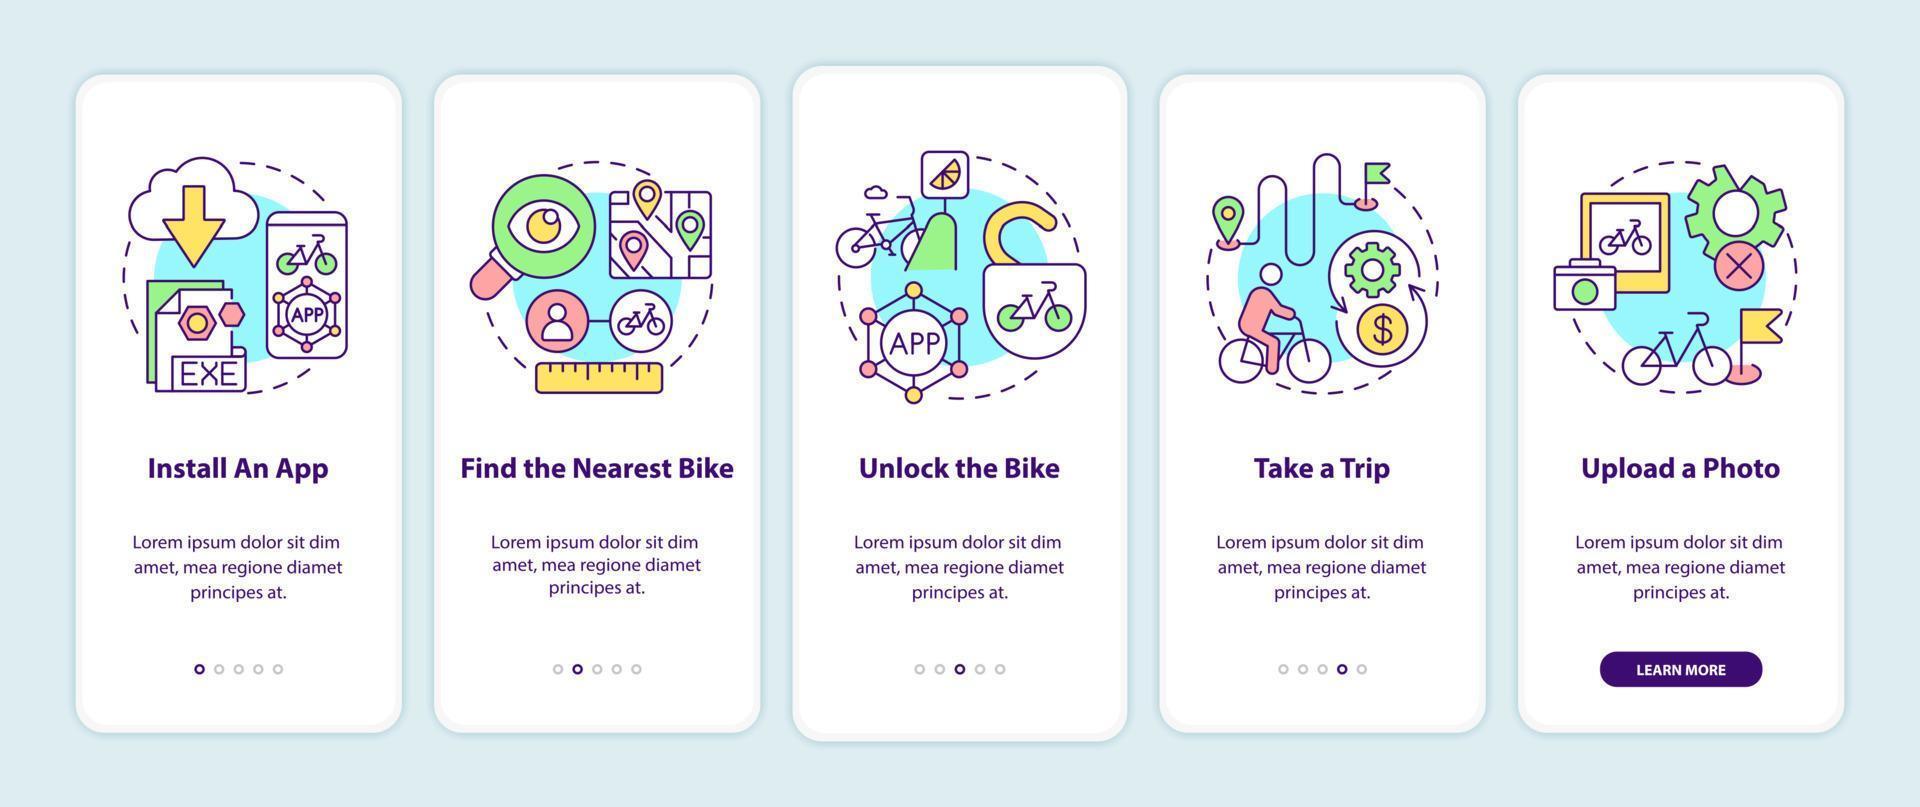 Bike sharing usage onboarding mobile app page screen. Installing app and taking trip walkthrough 5 steps graphic instructions with concepts. UI, UX, GUI vector template with linear color illustrations